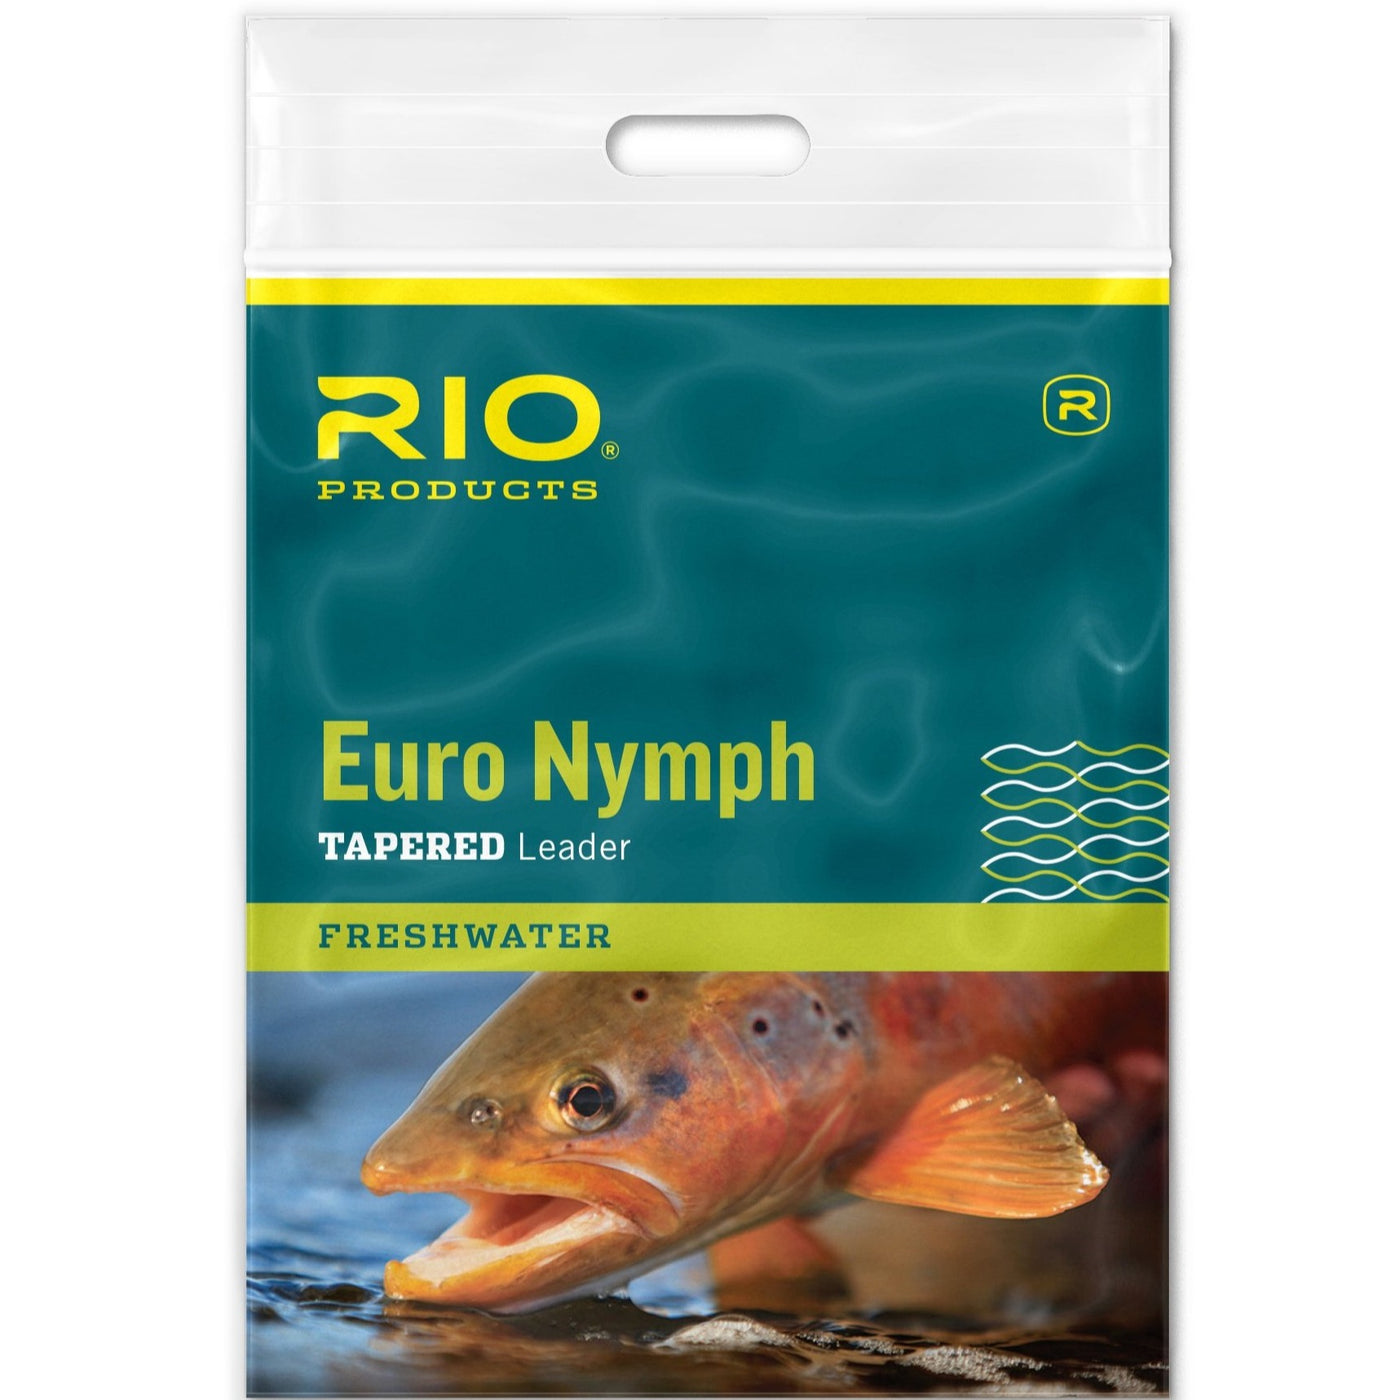 RIO Euro Nymph Tapered Leaders RIO Trout Leaders Sportfish, 53% OFF